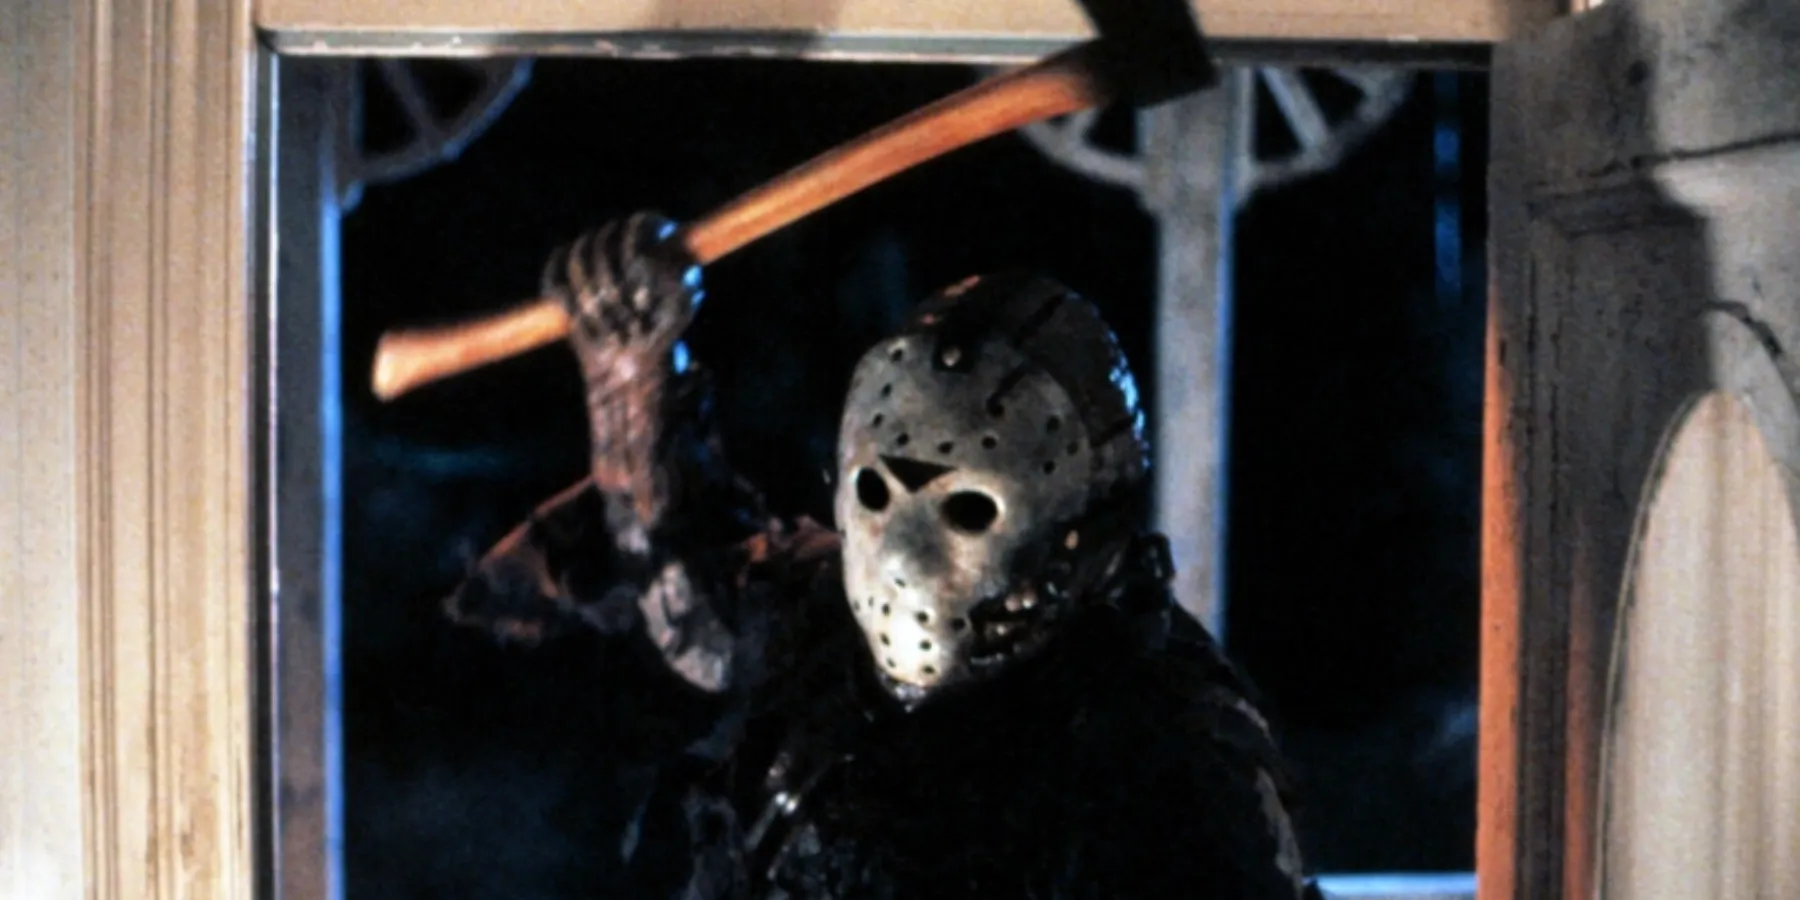 Jason Voorhees holding an axe in Friday The 13th Part VII: The New Blood